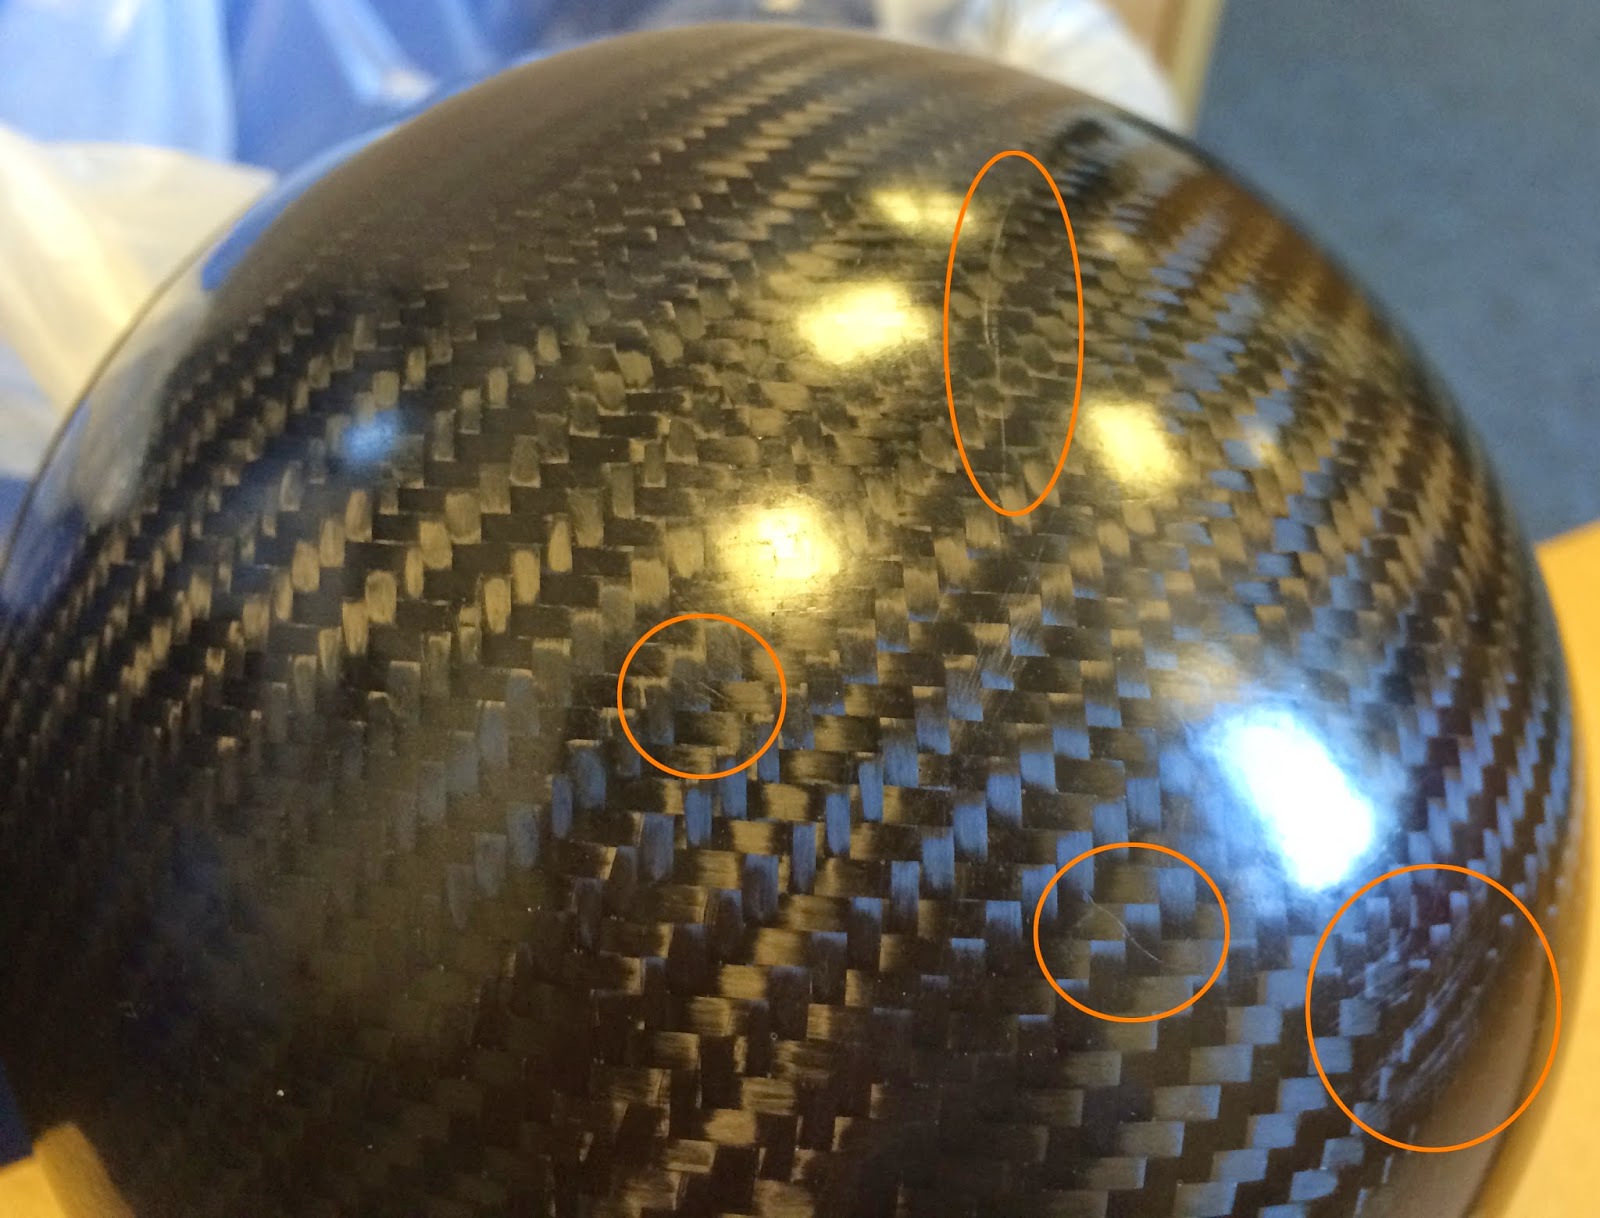 Caterham Carbon Headlight Bowls - with some of the scratches highlighted.